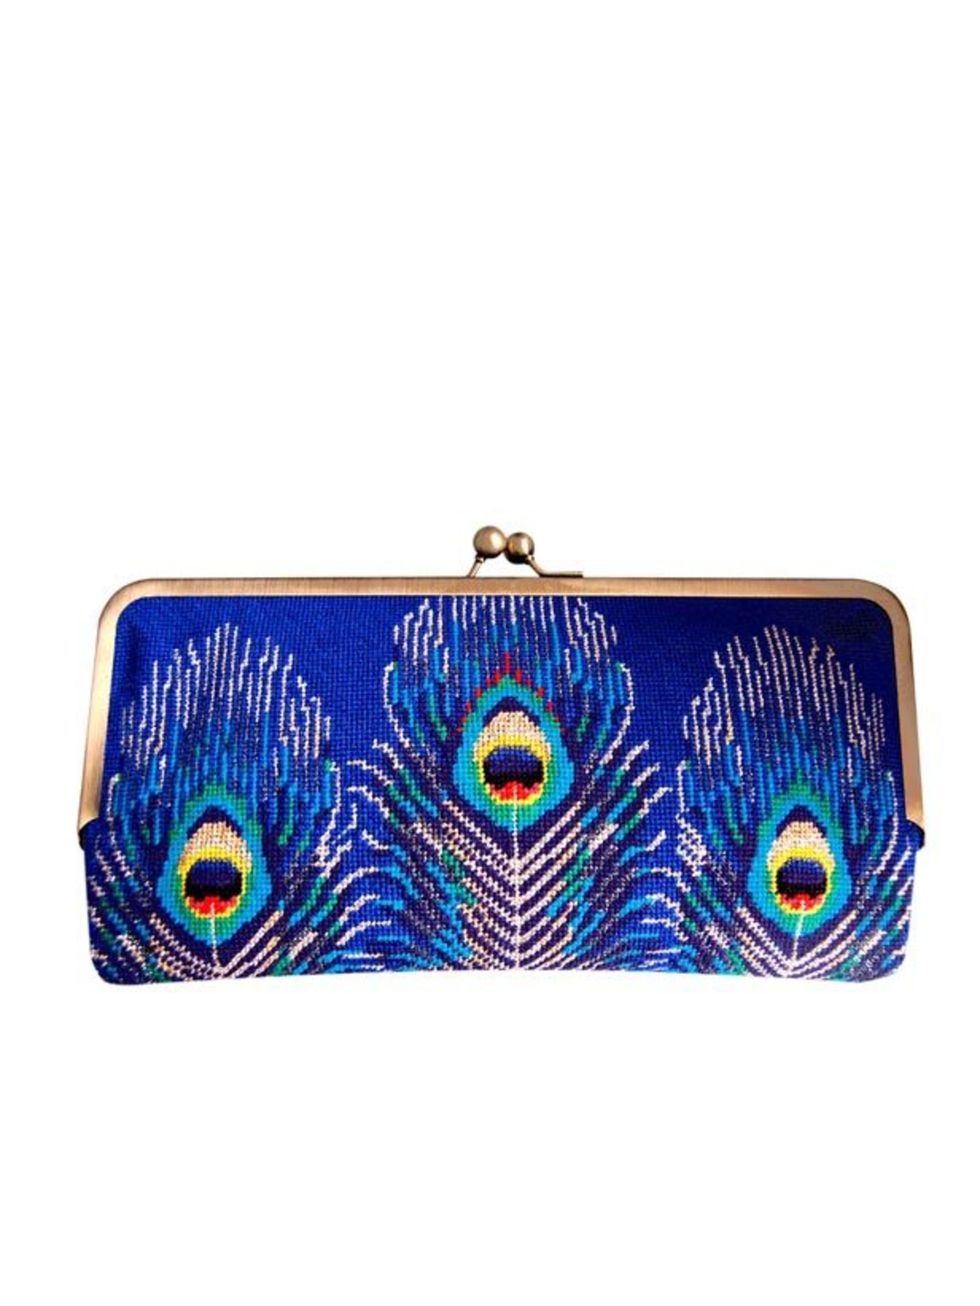 <p>This pretty hand-embroidered purse will instantly brighten up your handbag and come winter will prove to be the perfect accessory in your eccentric ladylike arsenal... <a href="http://www.felicityhall.co.uk/prod1.asp?ID=287">Felicity Hall</a> peacock p